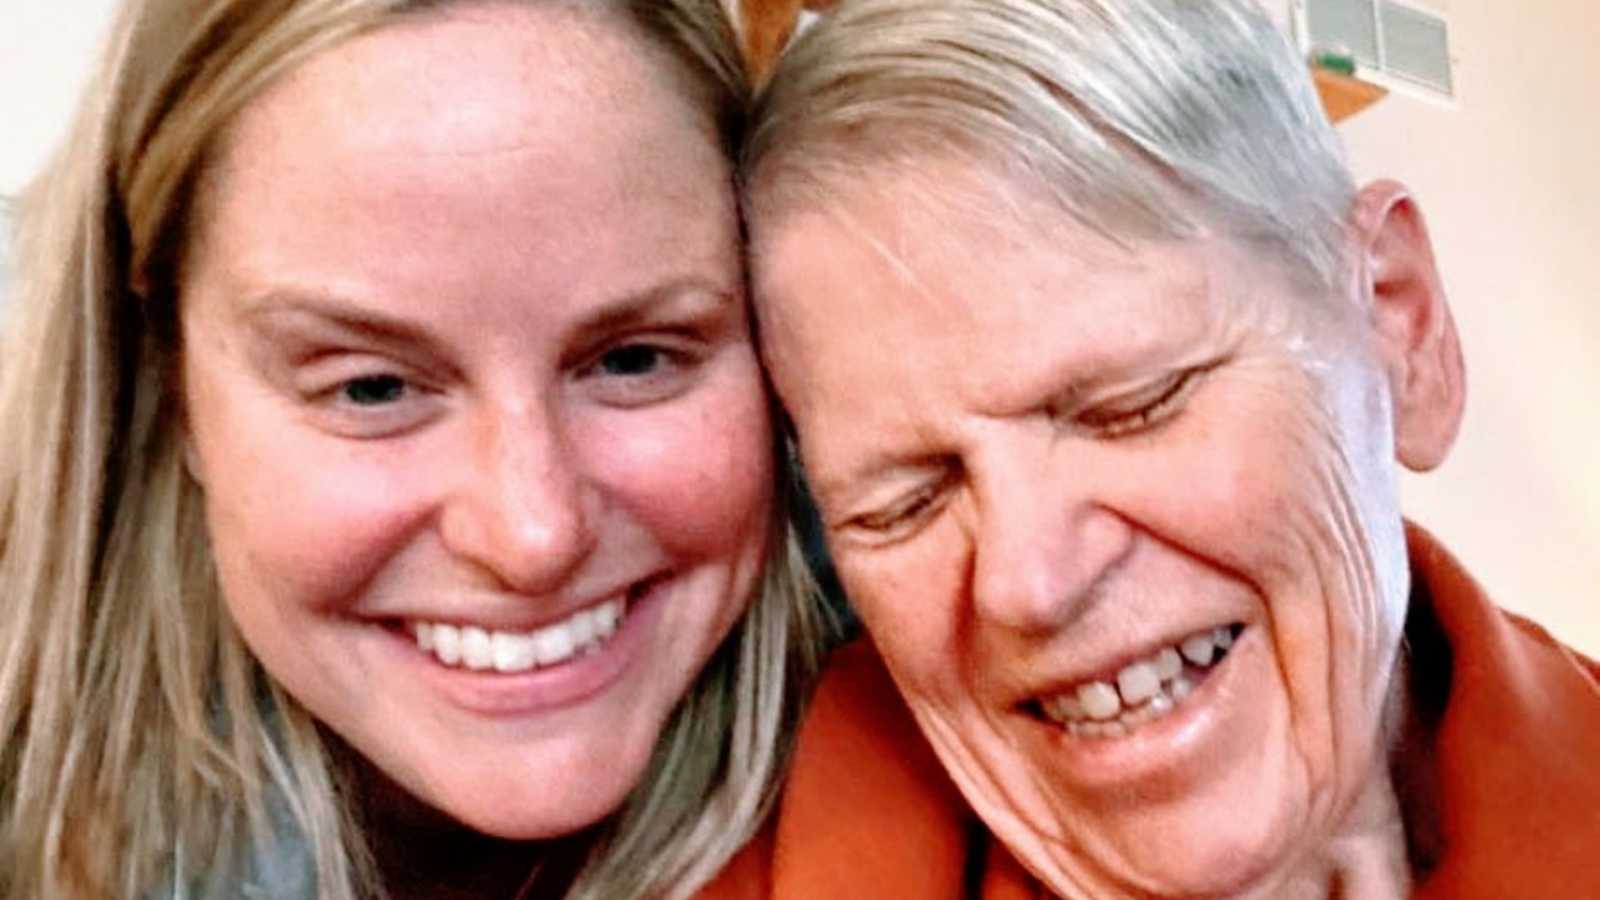 Woman takes sweet selfie with mom fighting Alzheimer's disease